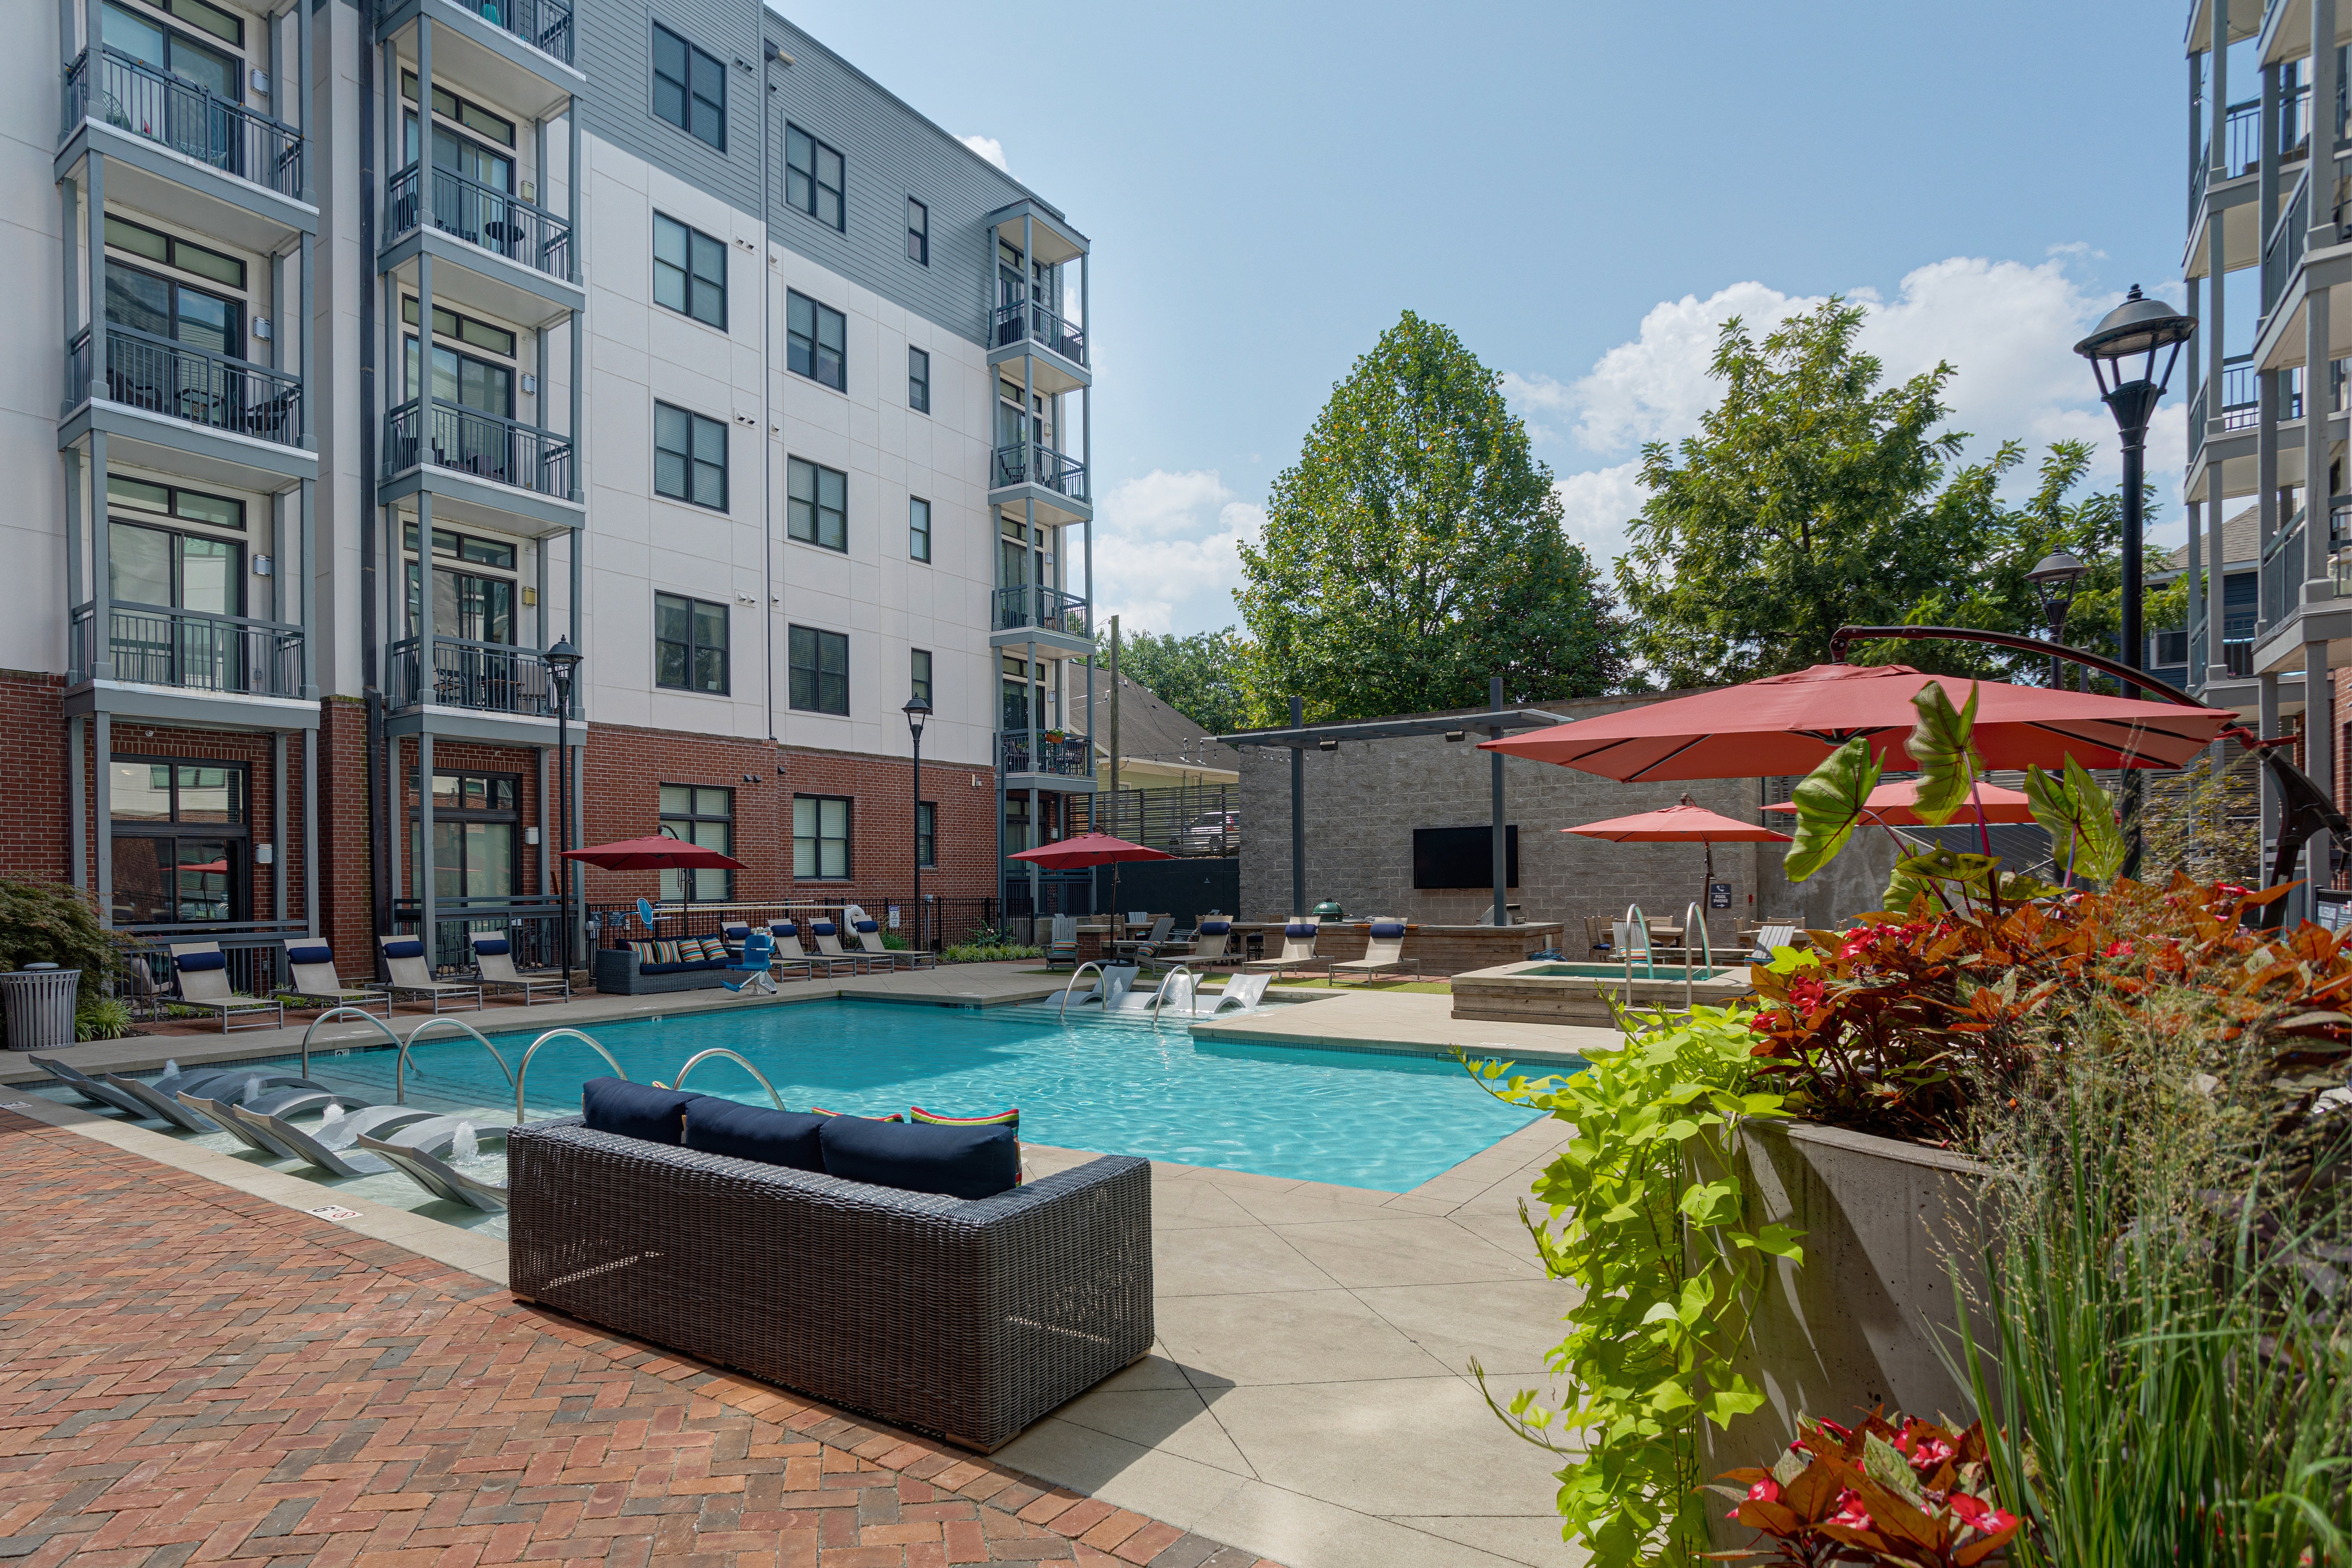 our apartments have a pool and lounge areas with umbrellas